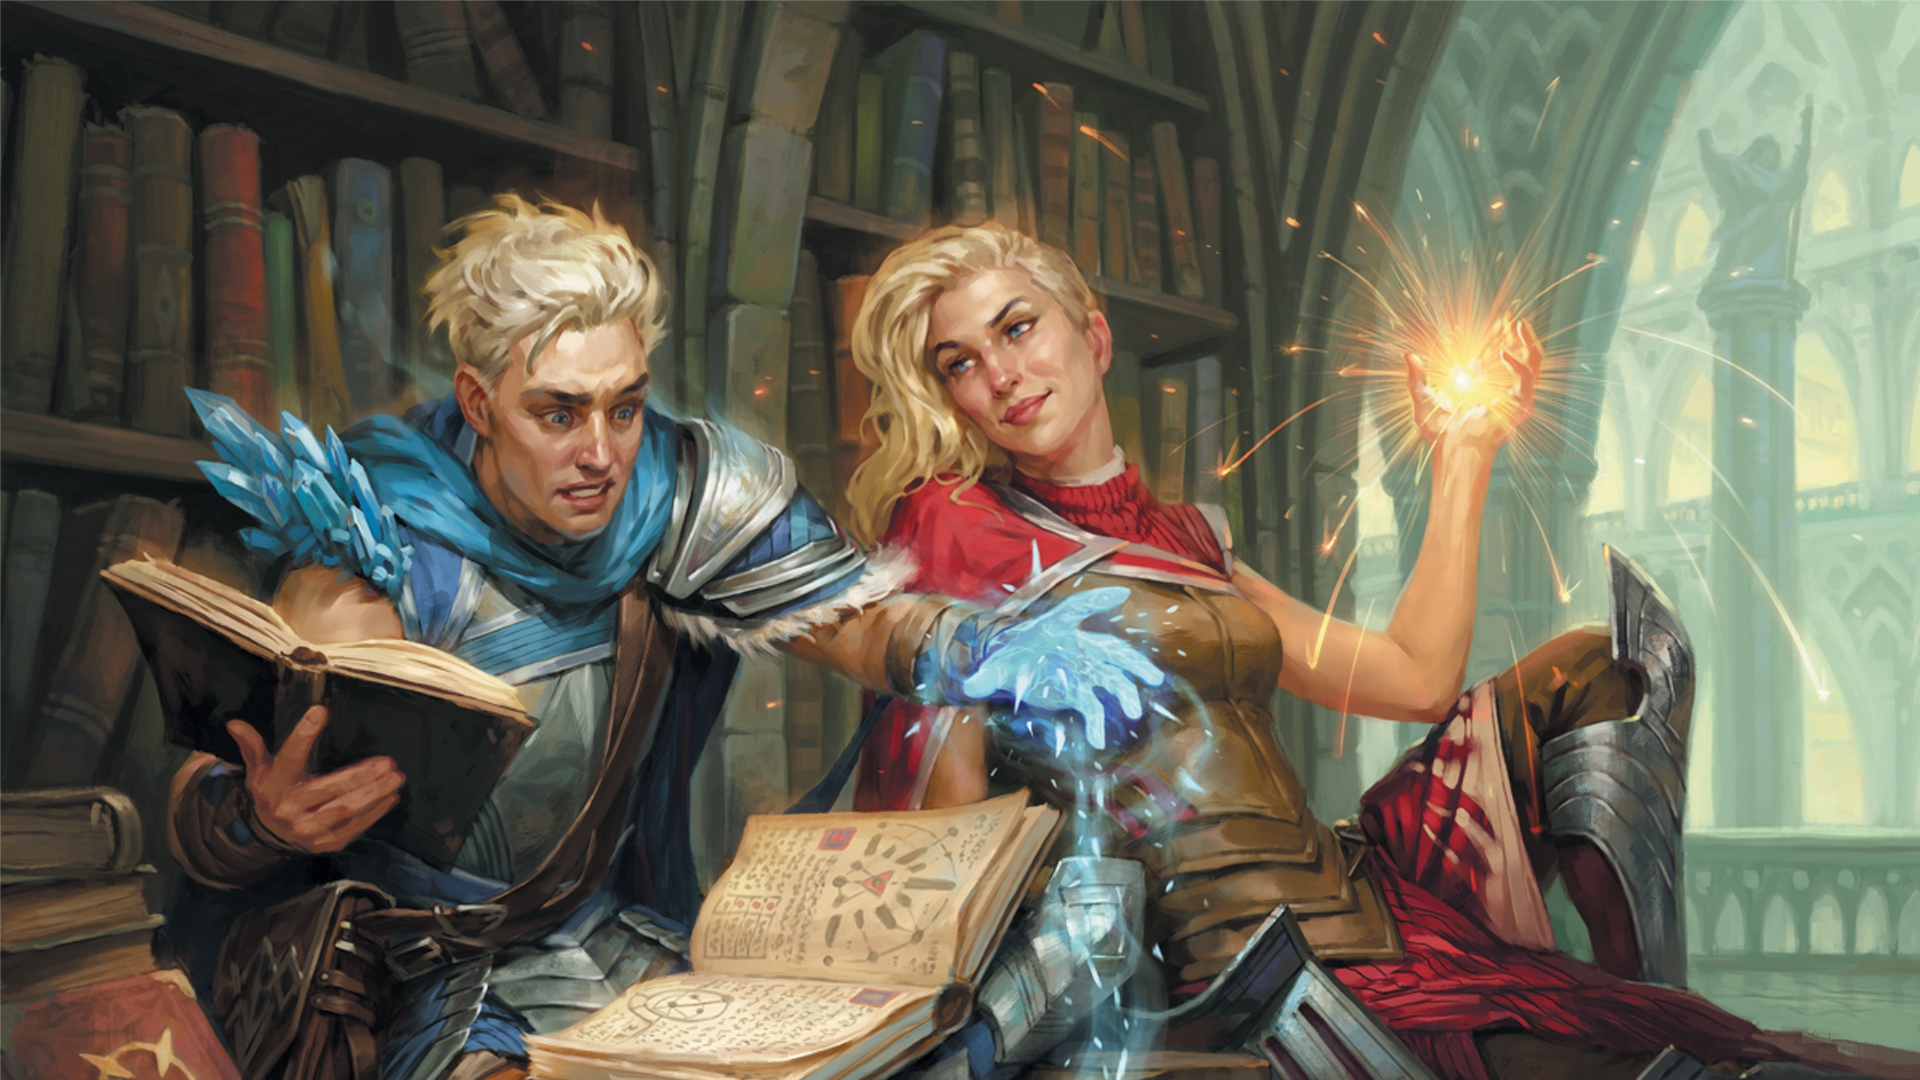 DnD cantrips 5e - Wizards of the Coast art of two students practicing magic in a library